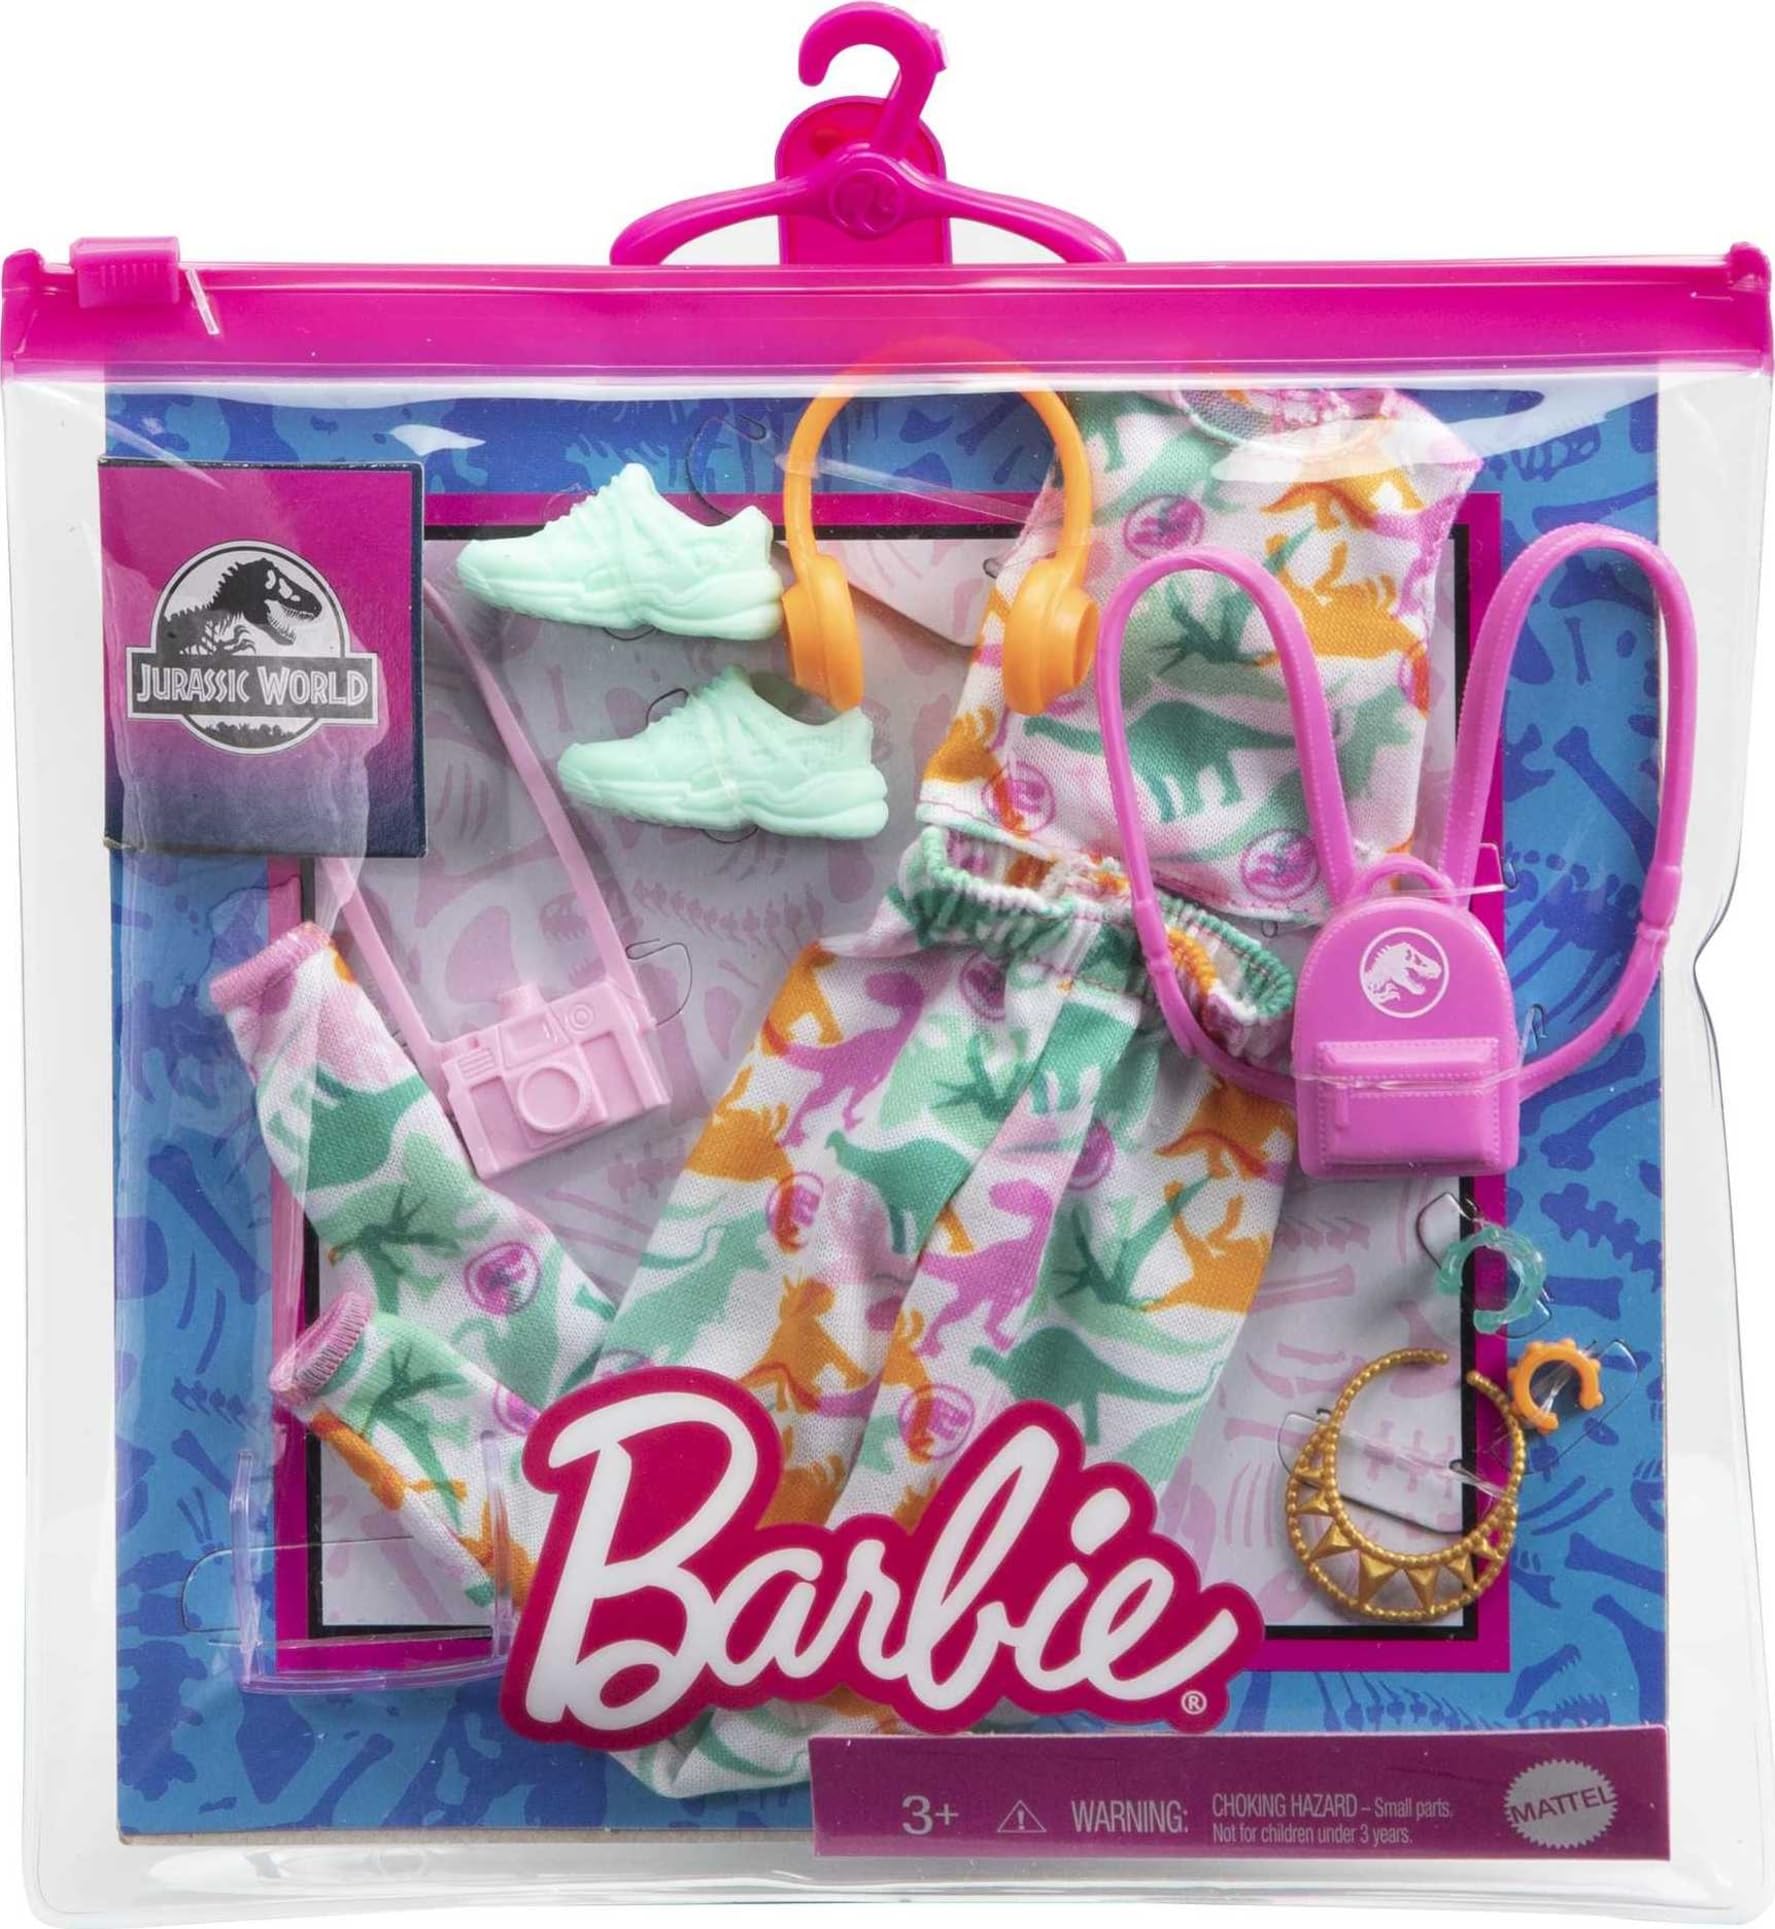 Barbie Clothing & Accessories Inspired by Jurassic World with 10 Storytelling Pieces for Barbie Dolls: Sleeveless Crop Top & Jogger Pants, Backpack, Camera, Headphones, Sunglasses & More